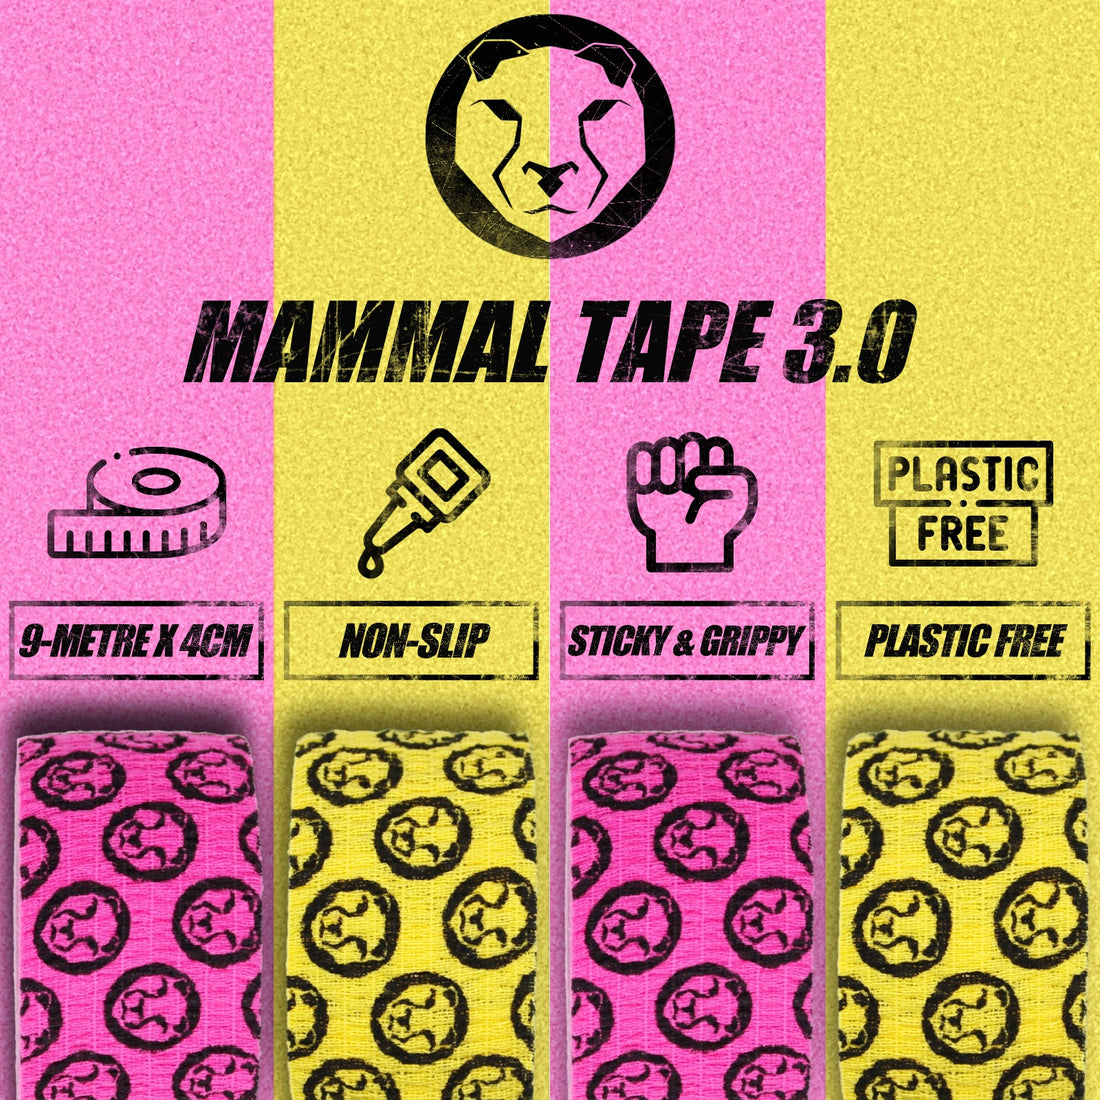 Pink Thumb &amp; Weightlifting Tape - Mammal Tape 3.0, 30ft / 9-Metre Rolls (4-Pack)